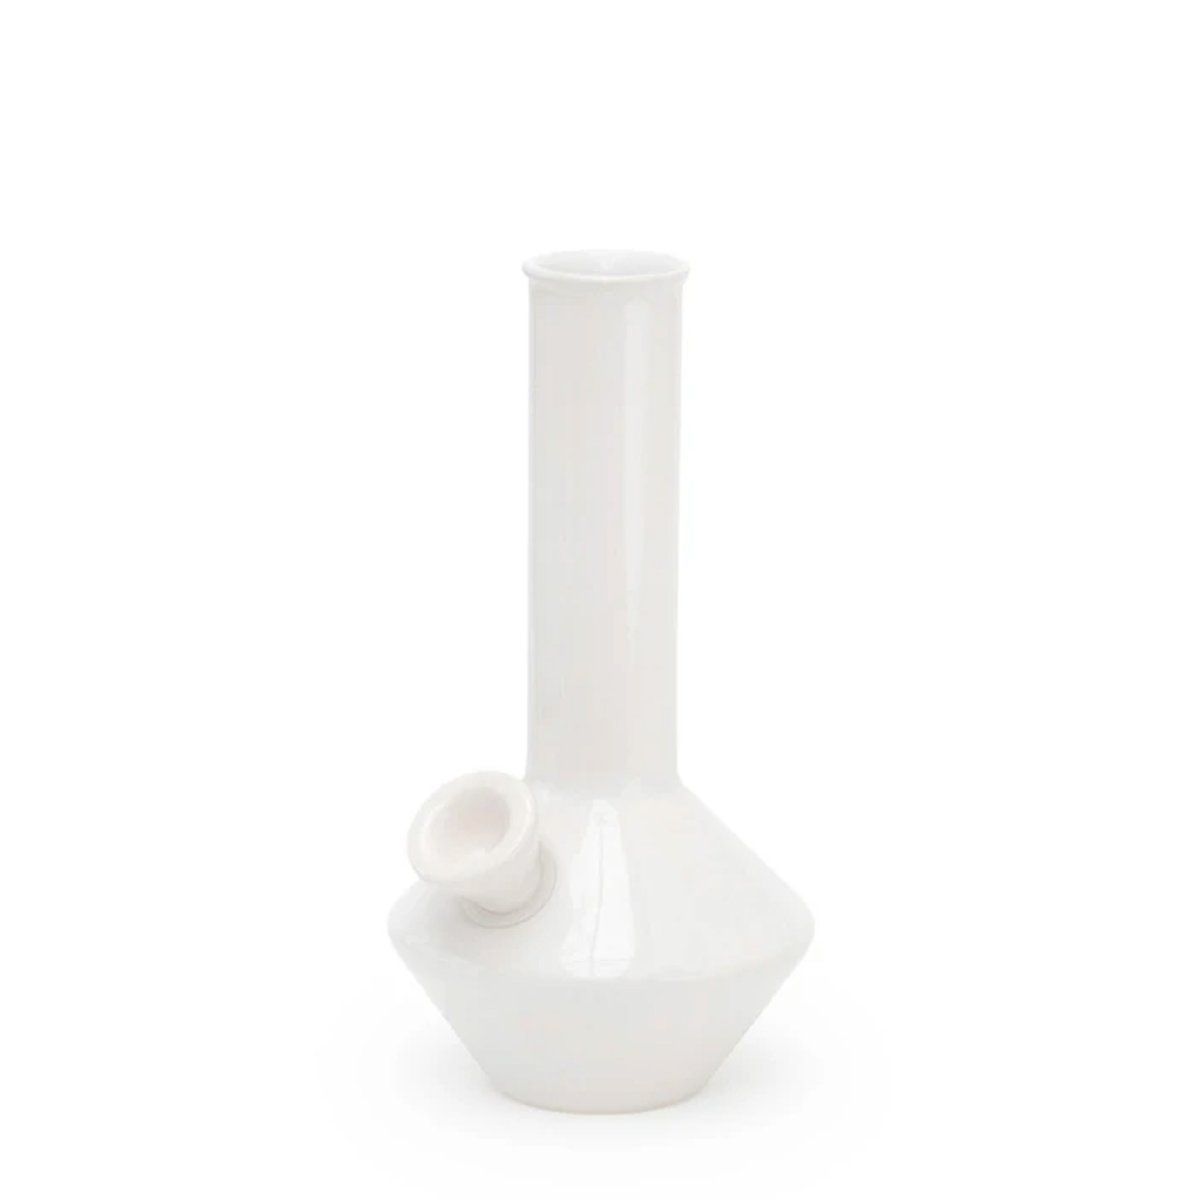 Summerland Pleasure Point Bong in Glossy White